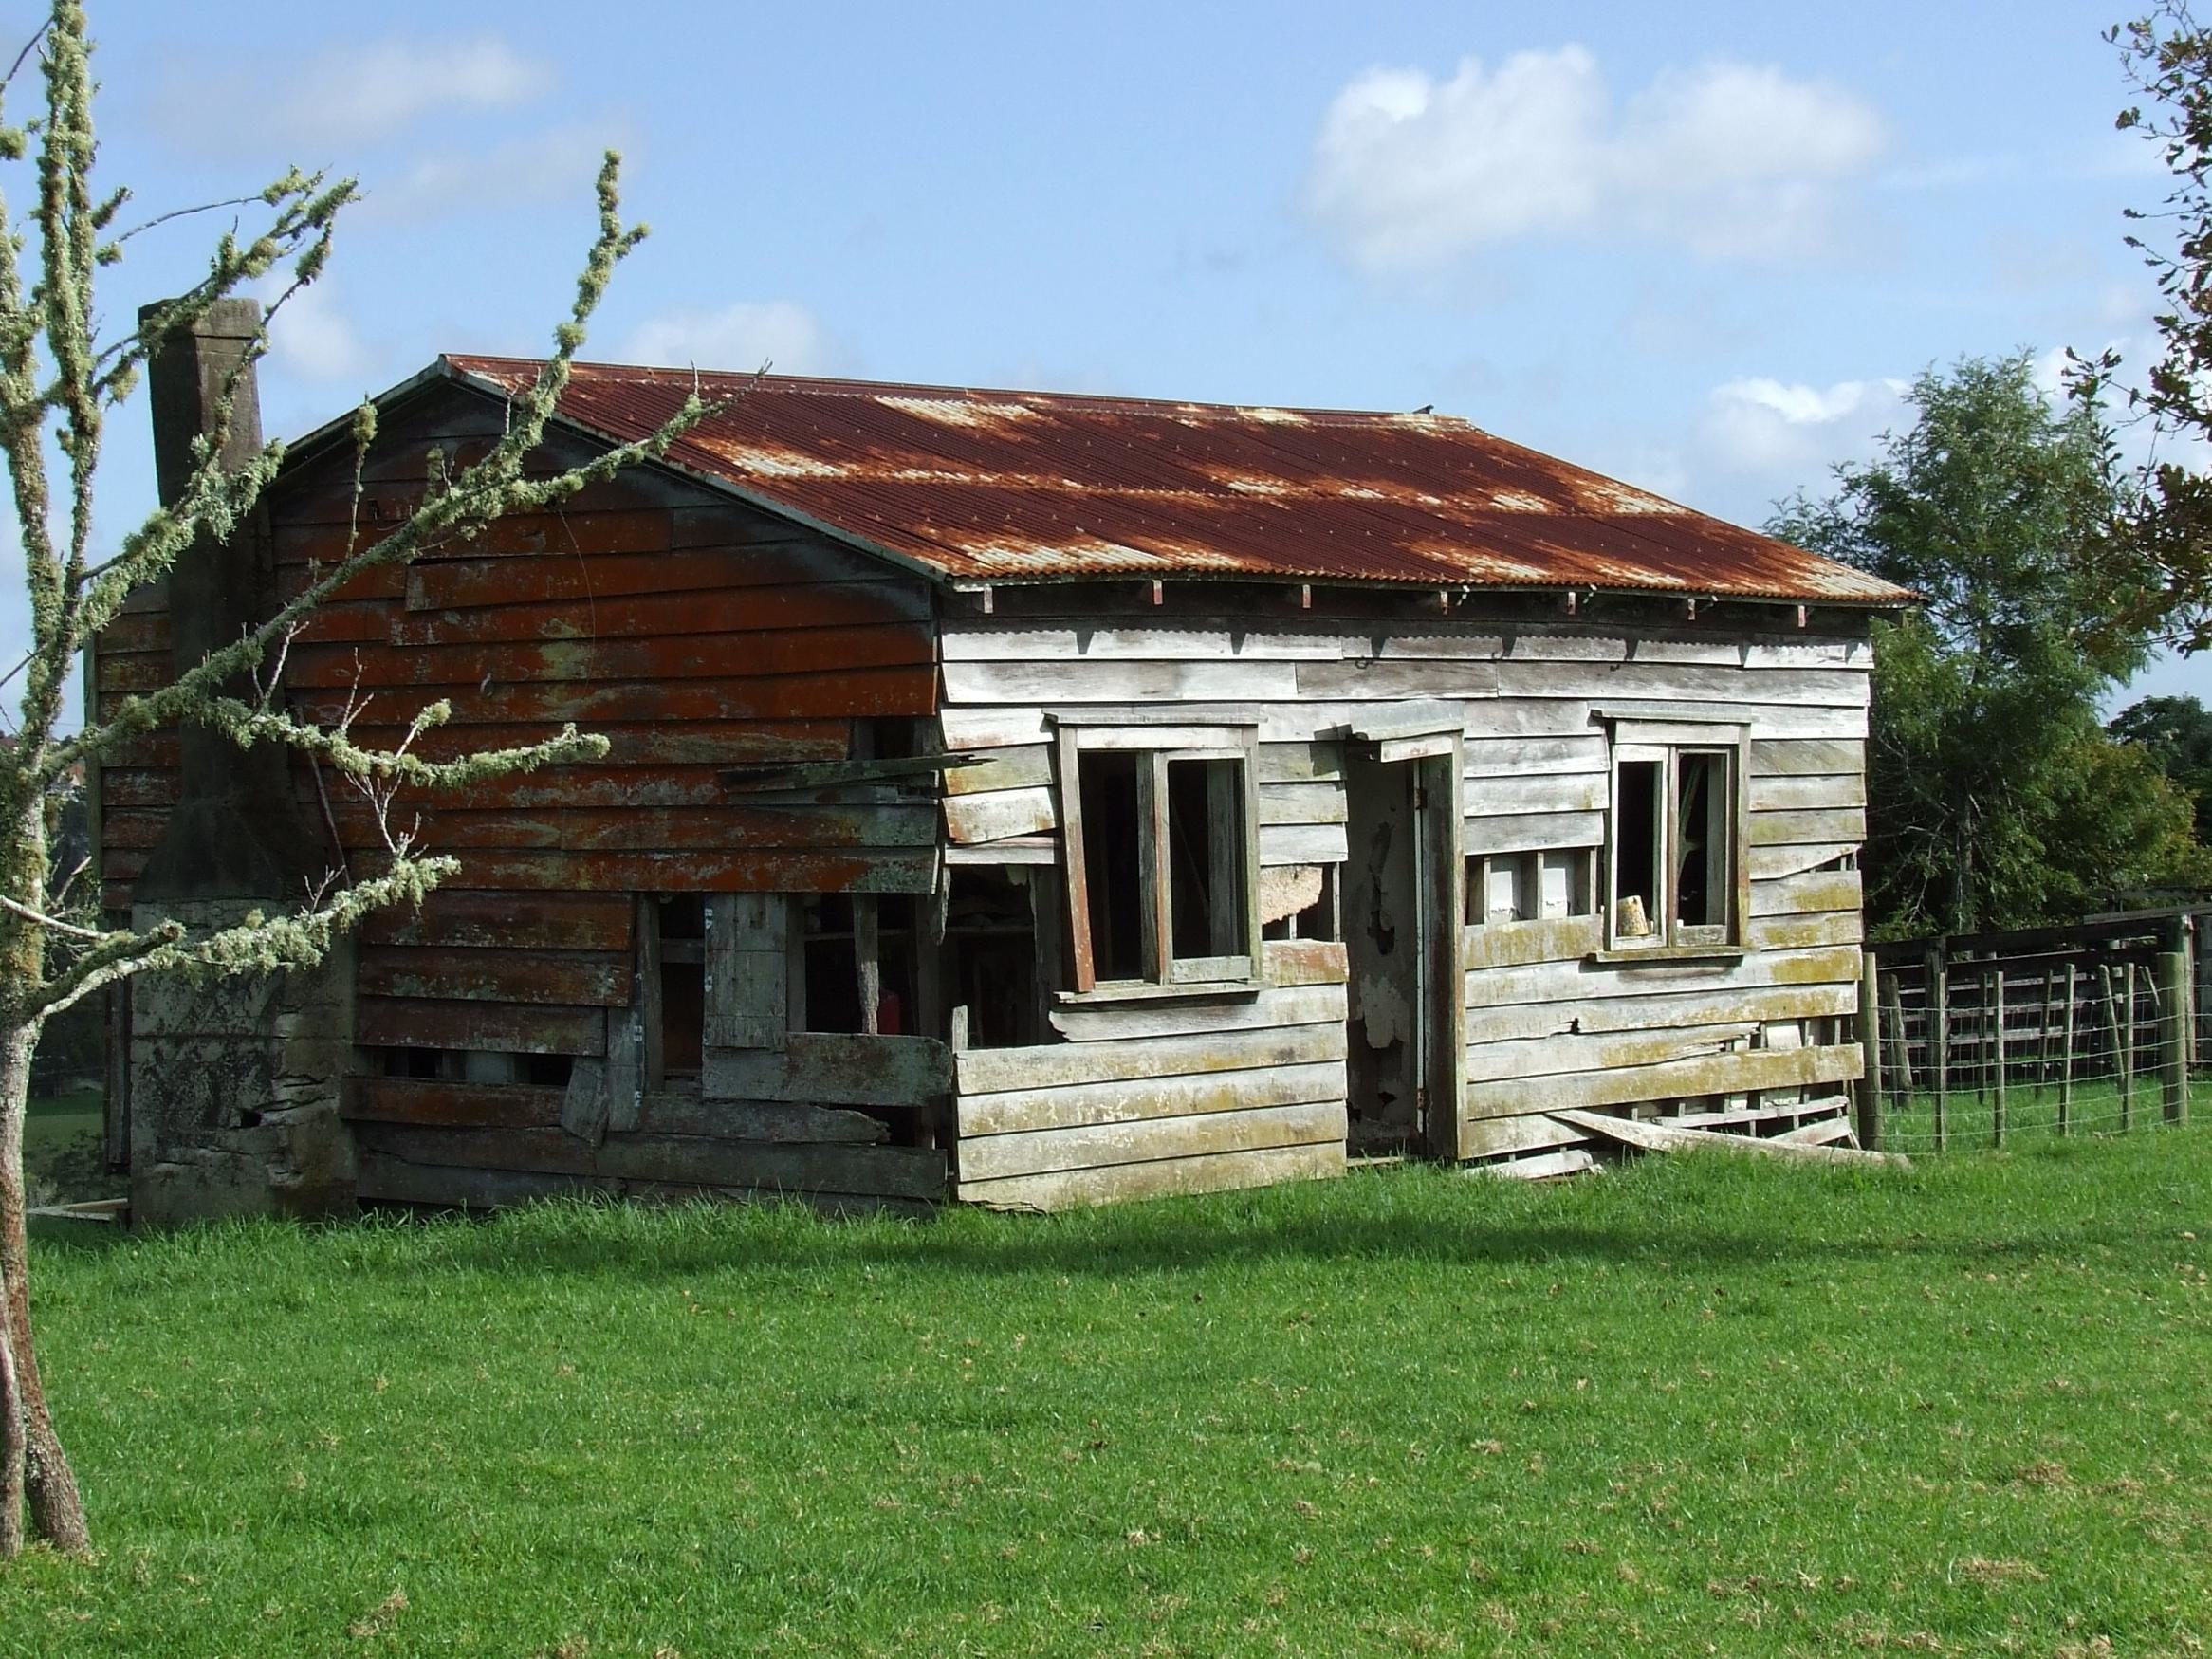 Free picture: house, home, wood, wooden, barn, rustic, abandoned ...